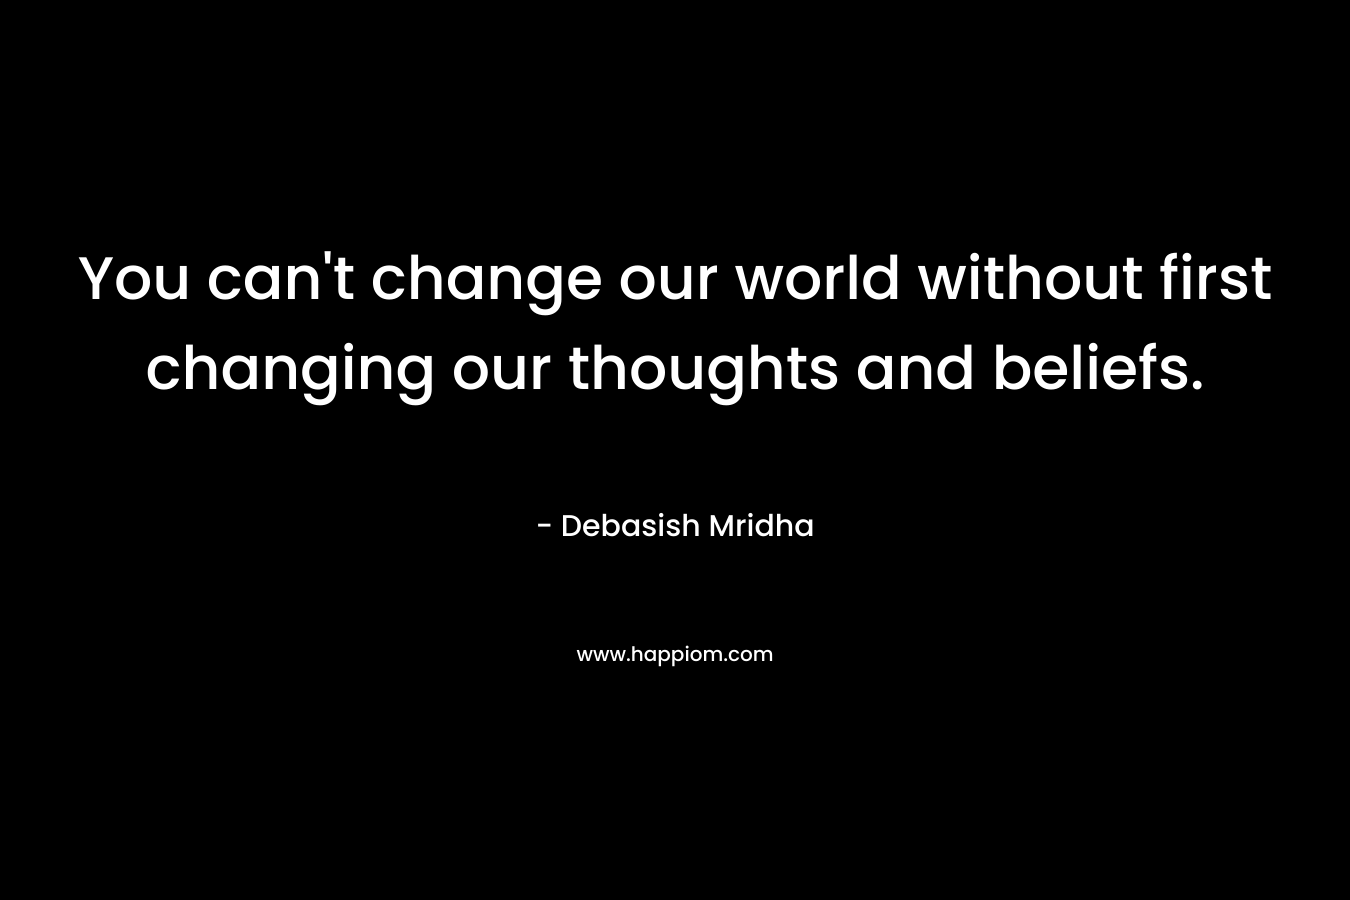 You can't change our world without first changing our thoughts and beliefs.